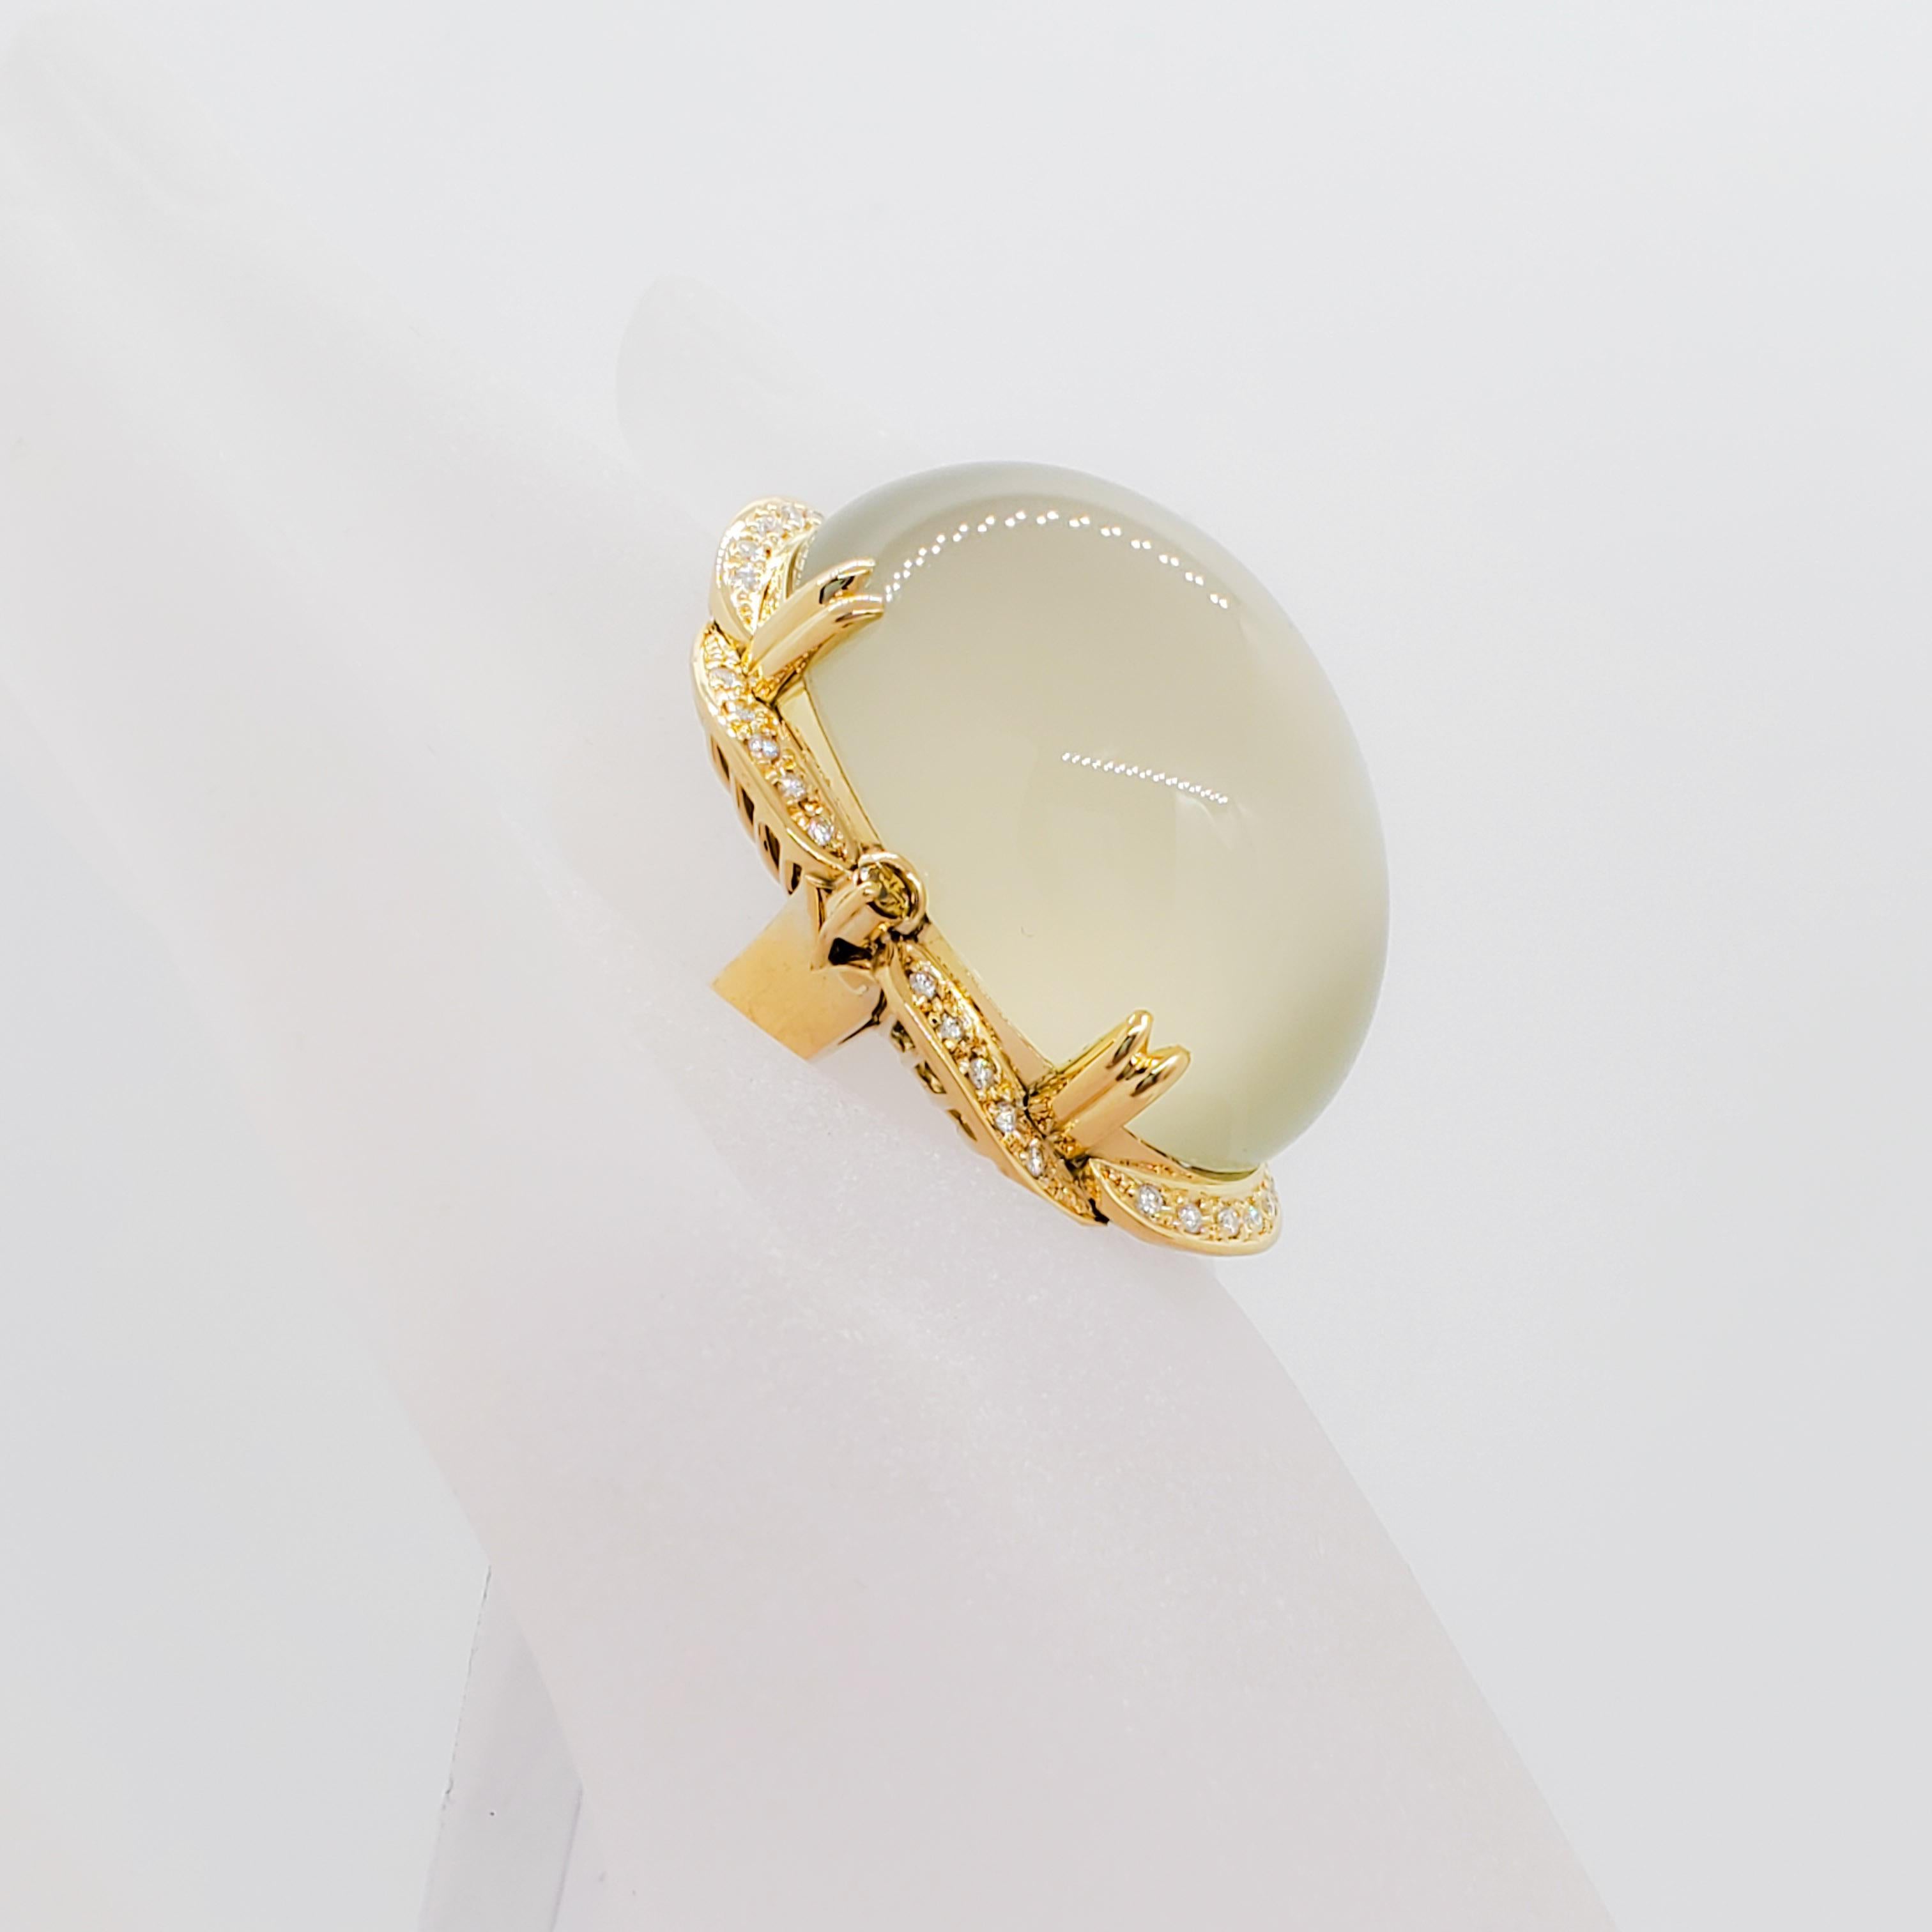 Spectacular 118.85 ct. moonstone oval cabochon with 0.61 ct. of good quality white diamond rounds in a handmade 18k yellow gold mounting.  This ring has a strong presence not only because of size but because of it's beautiful design.  Estate piece